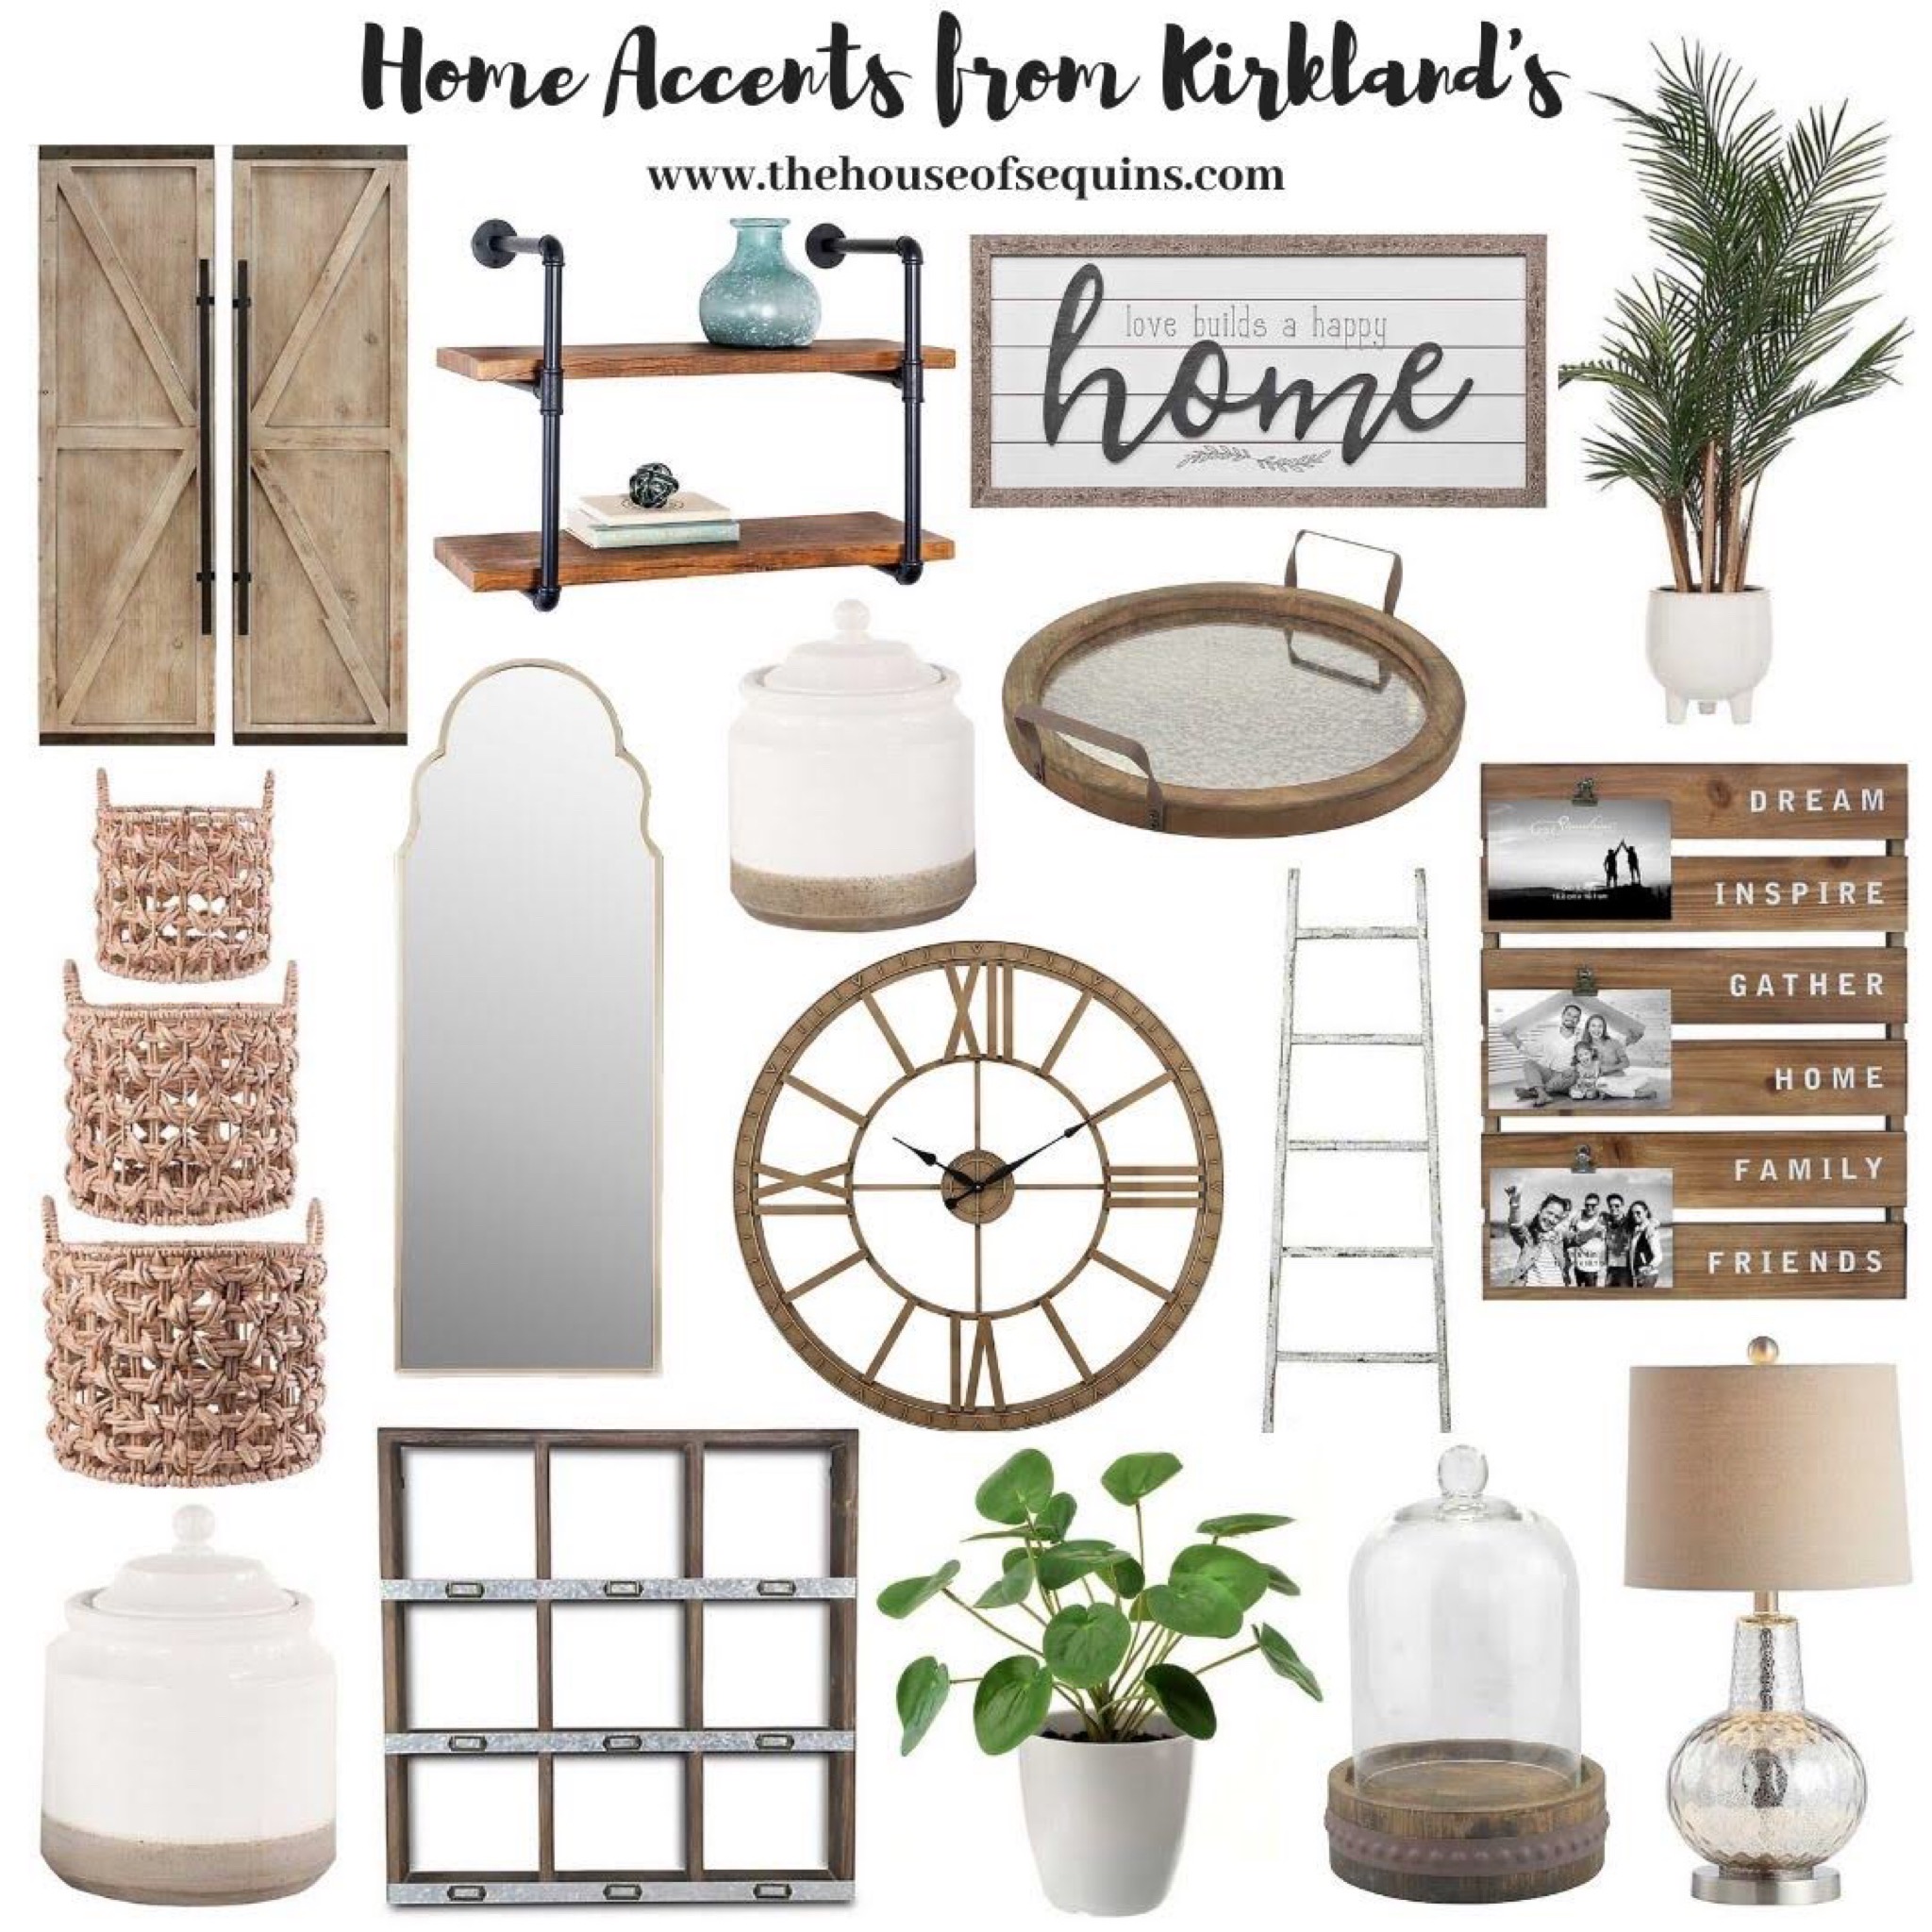 Home Decor from Kirkland\'s - The House of Sequins